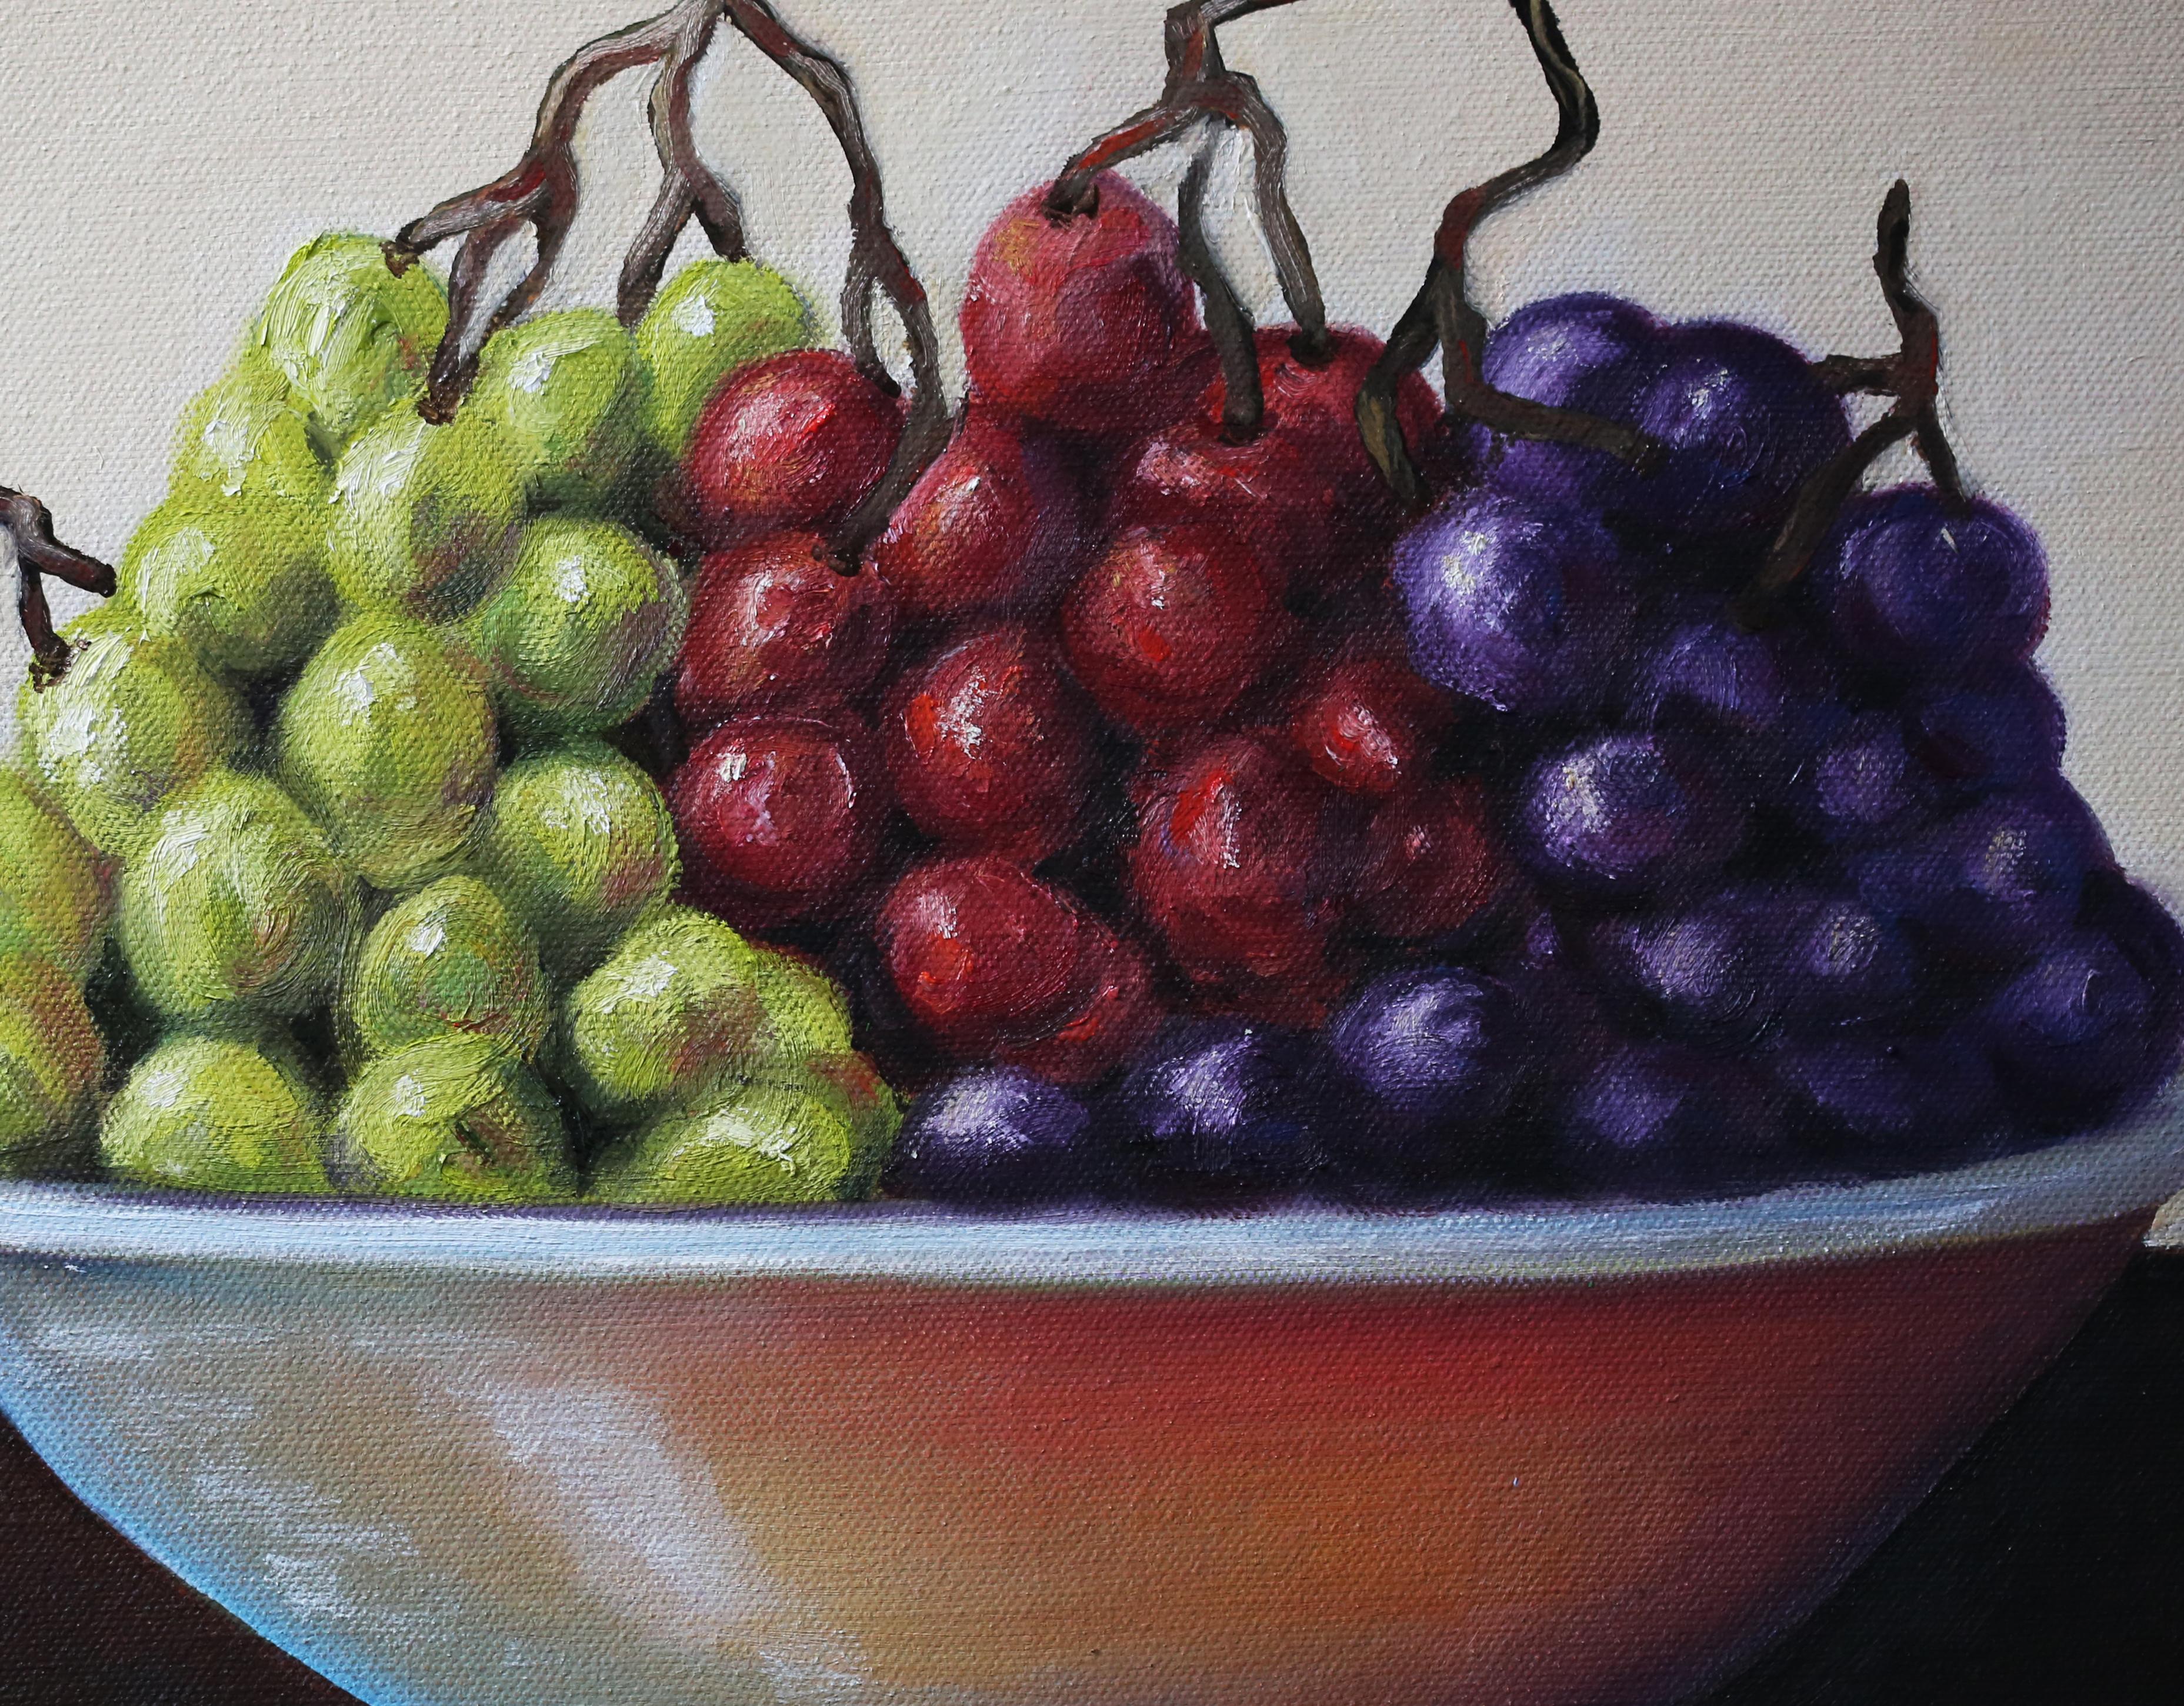 <p>Artist Comments<br />I'm working on a series of fruits and vegetables that come in rainbow colors. It's amazing how just the skin and the flavor are the only thing that makes these grapes different from each other.</p><p>About the Artist<br